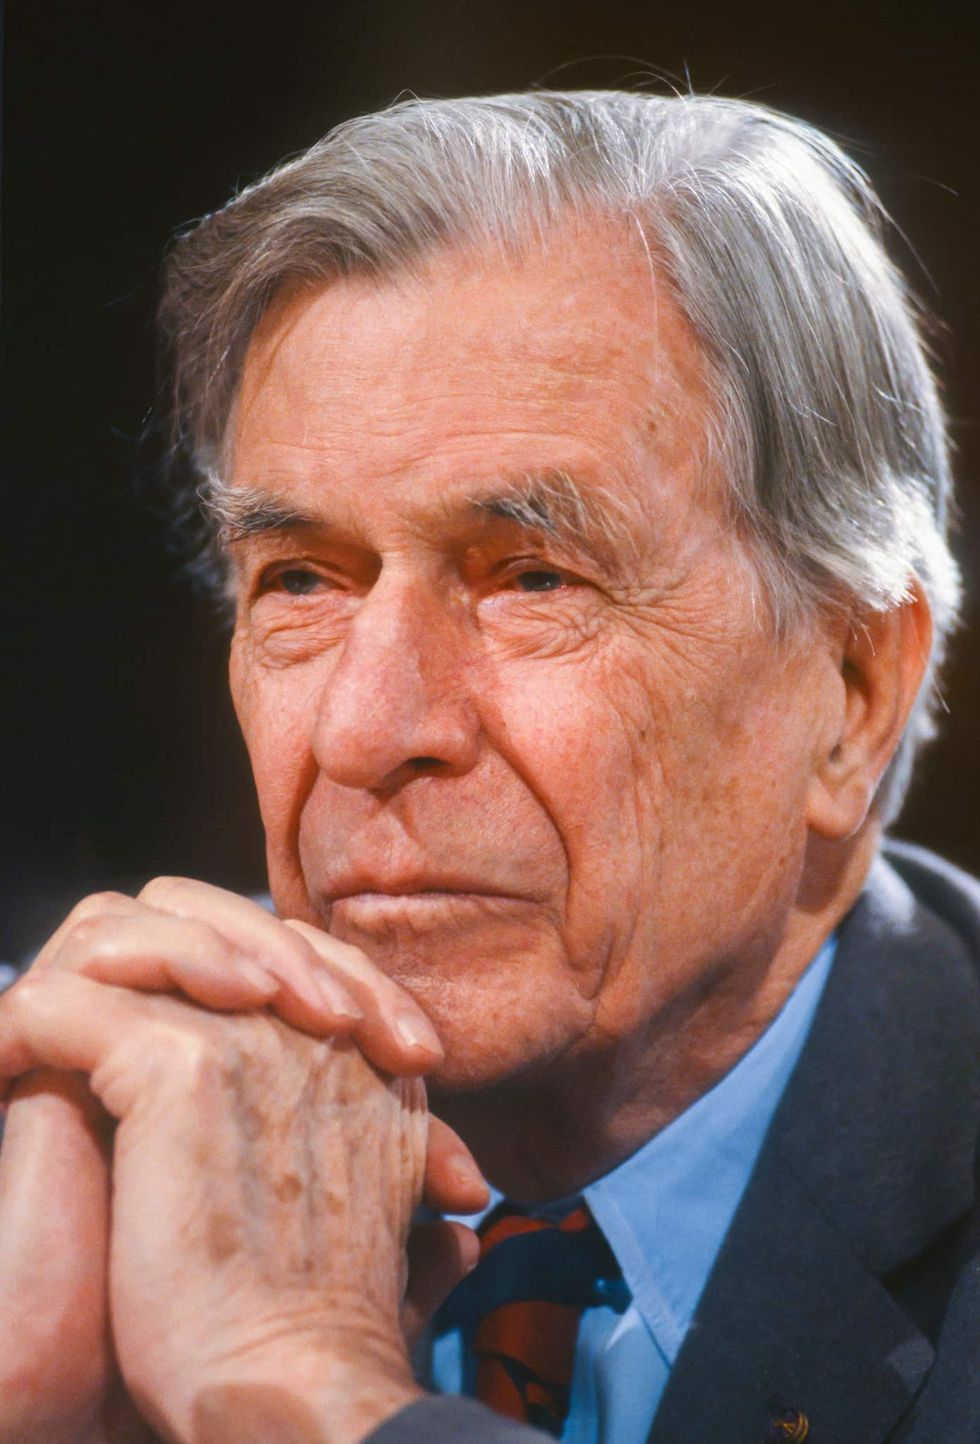 To read John Kenneth Galbraith quotes, keep reading this article.